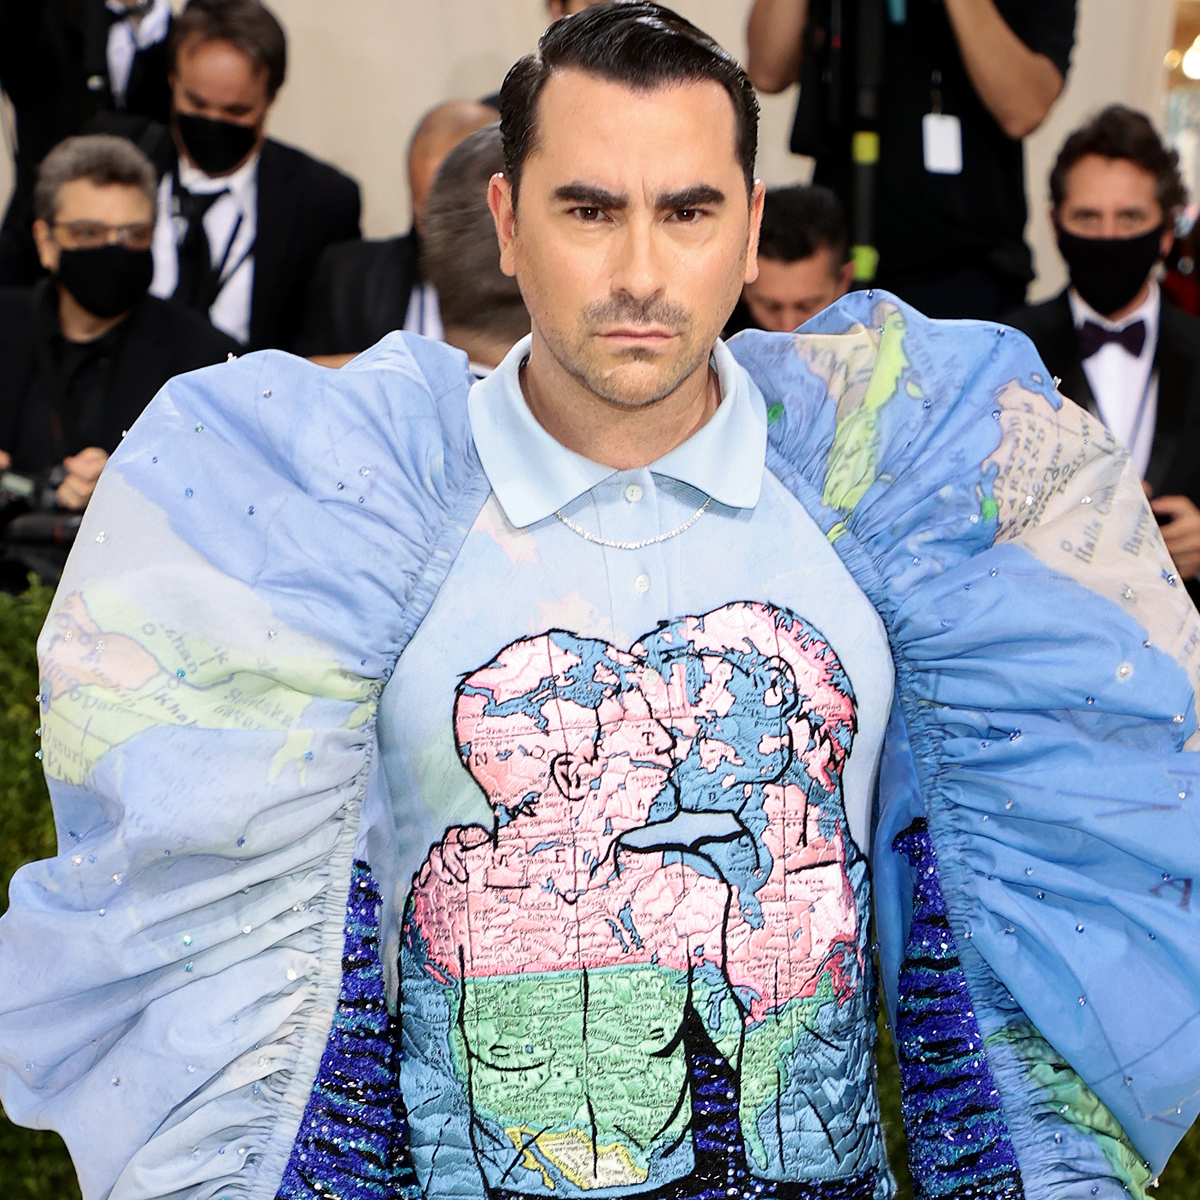 Dan Levy's Met Gala Look Has a Message That's Simply the Best - E! Online